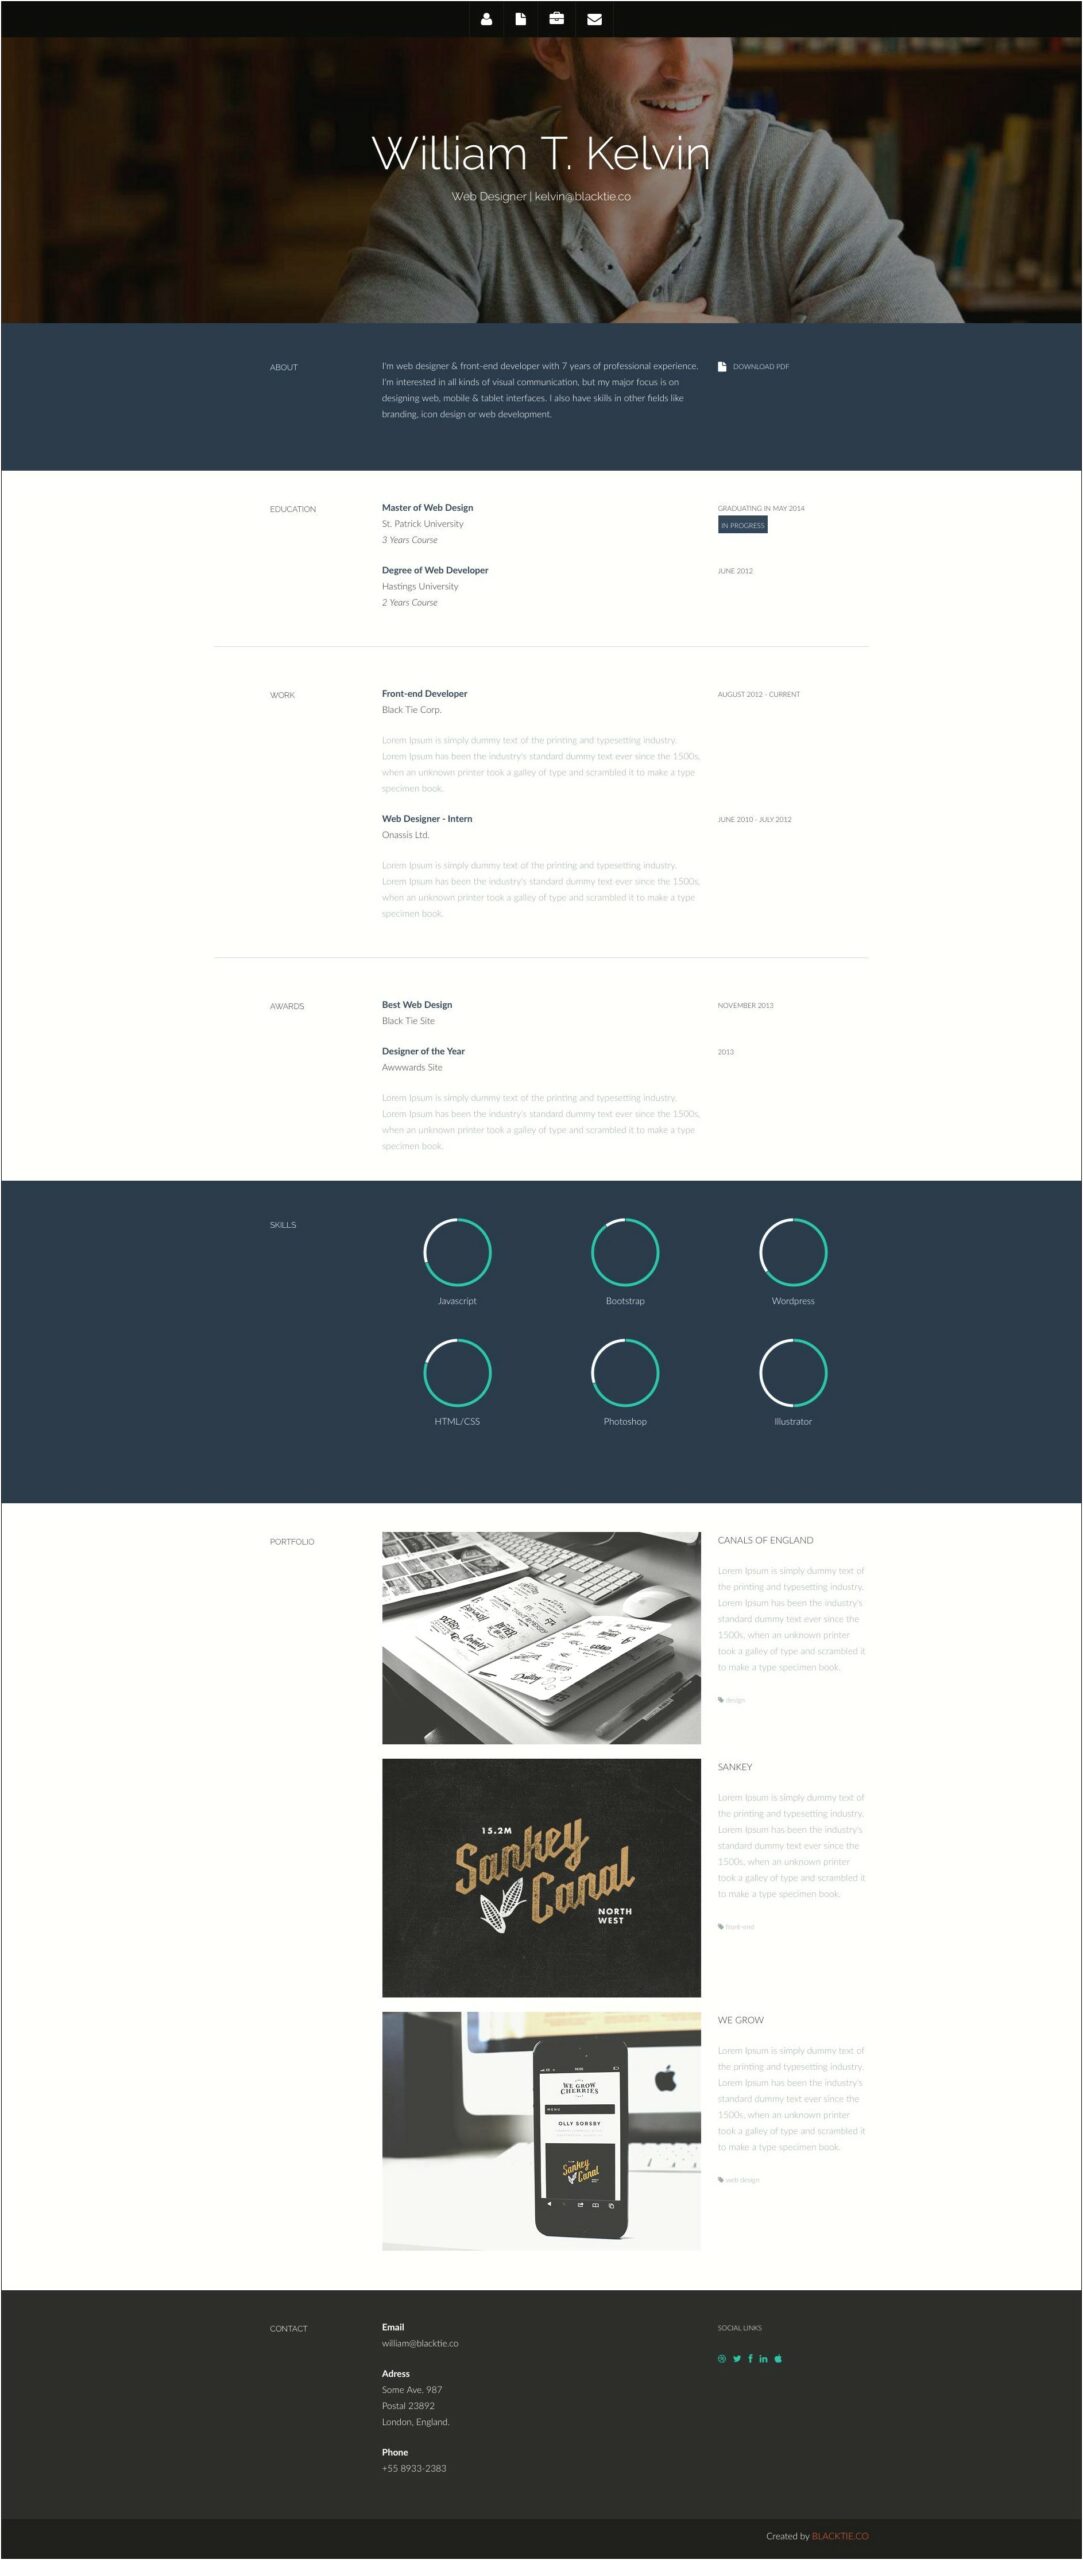 Free Personal Resume Website Template